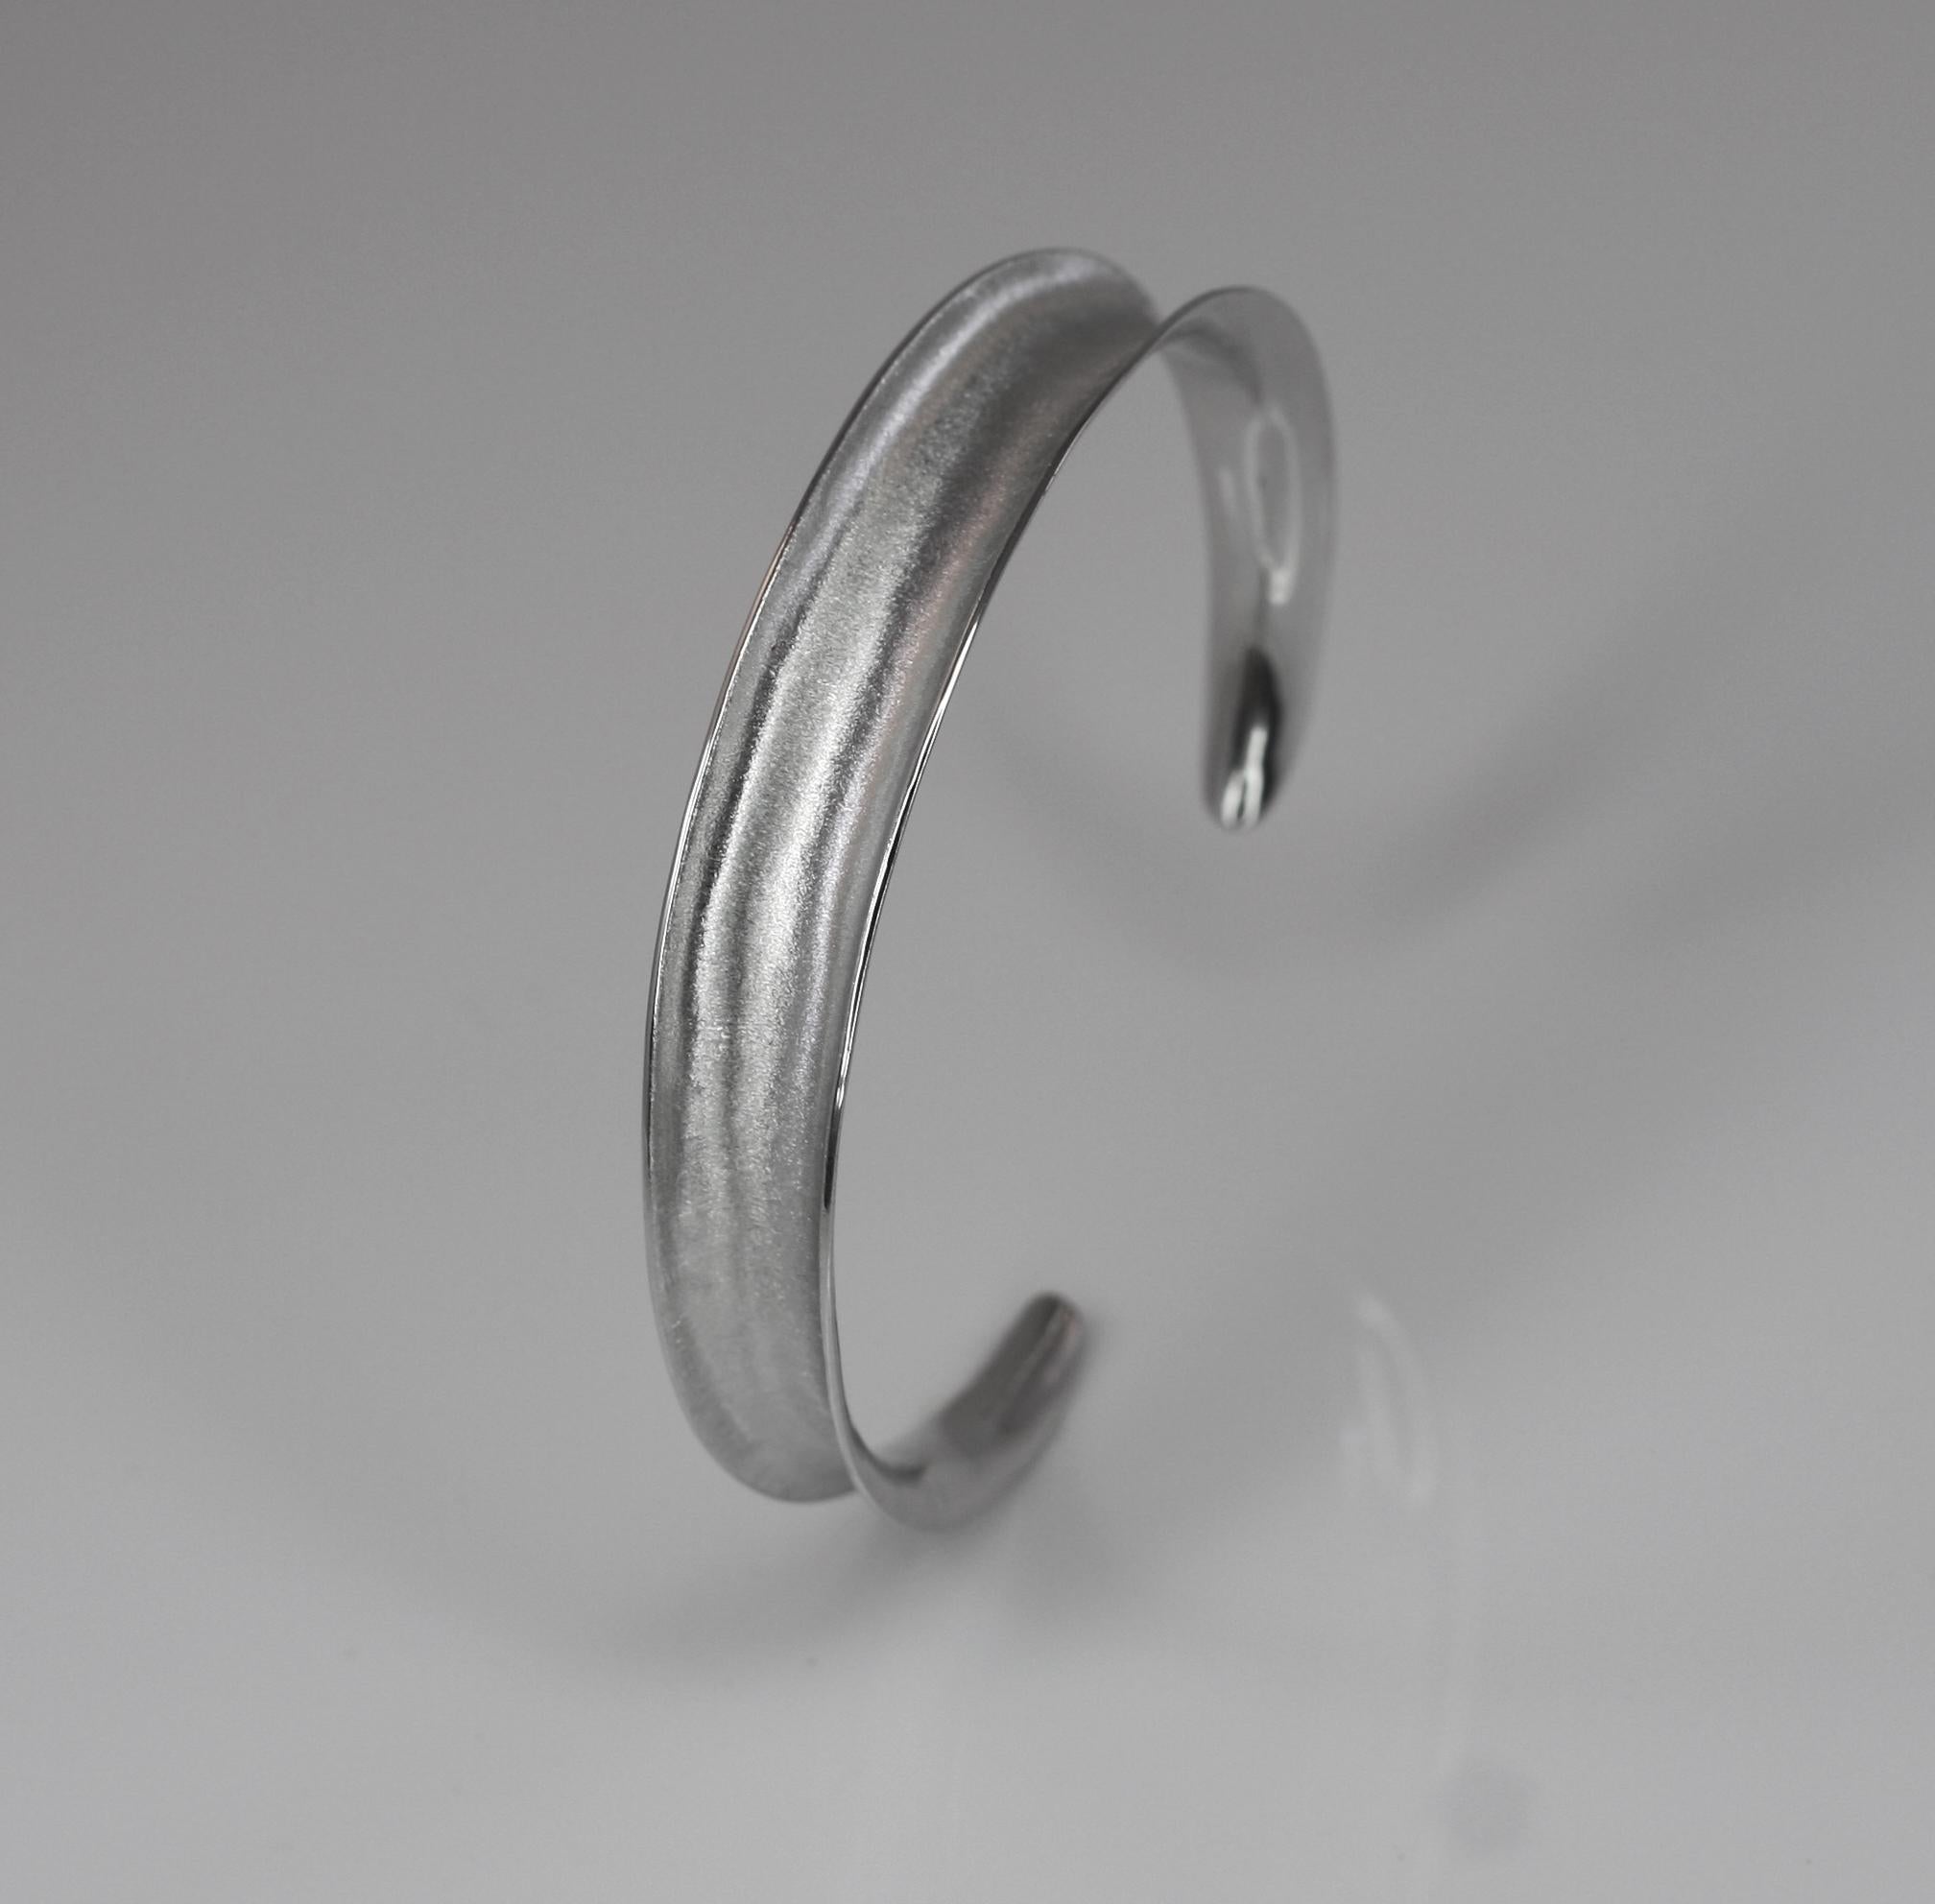 Contemporary Yianni Creations Fine Silver and Palladium Bangle Bracelet